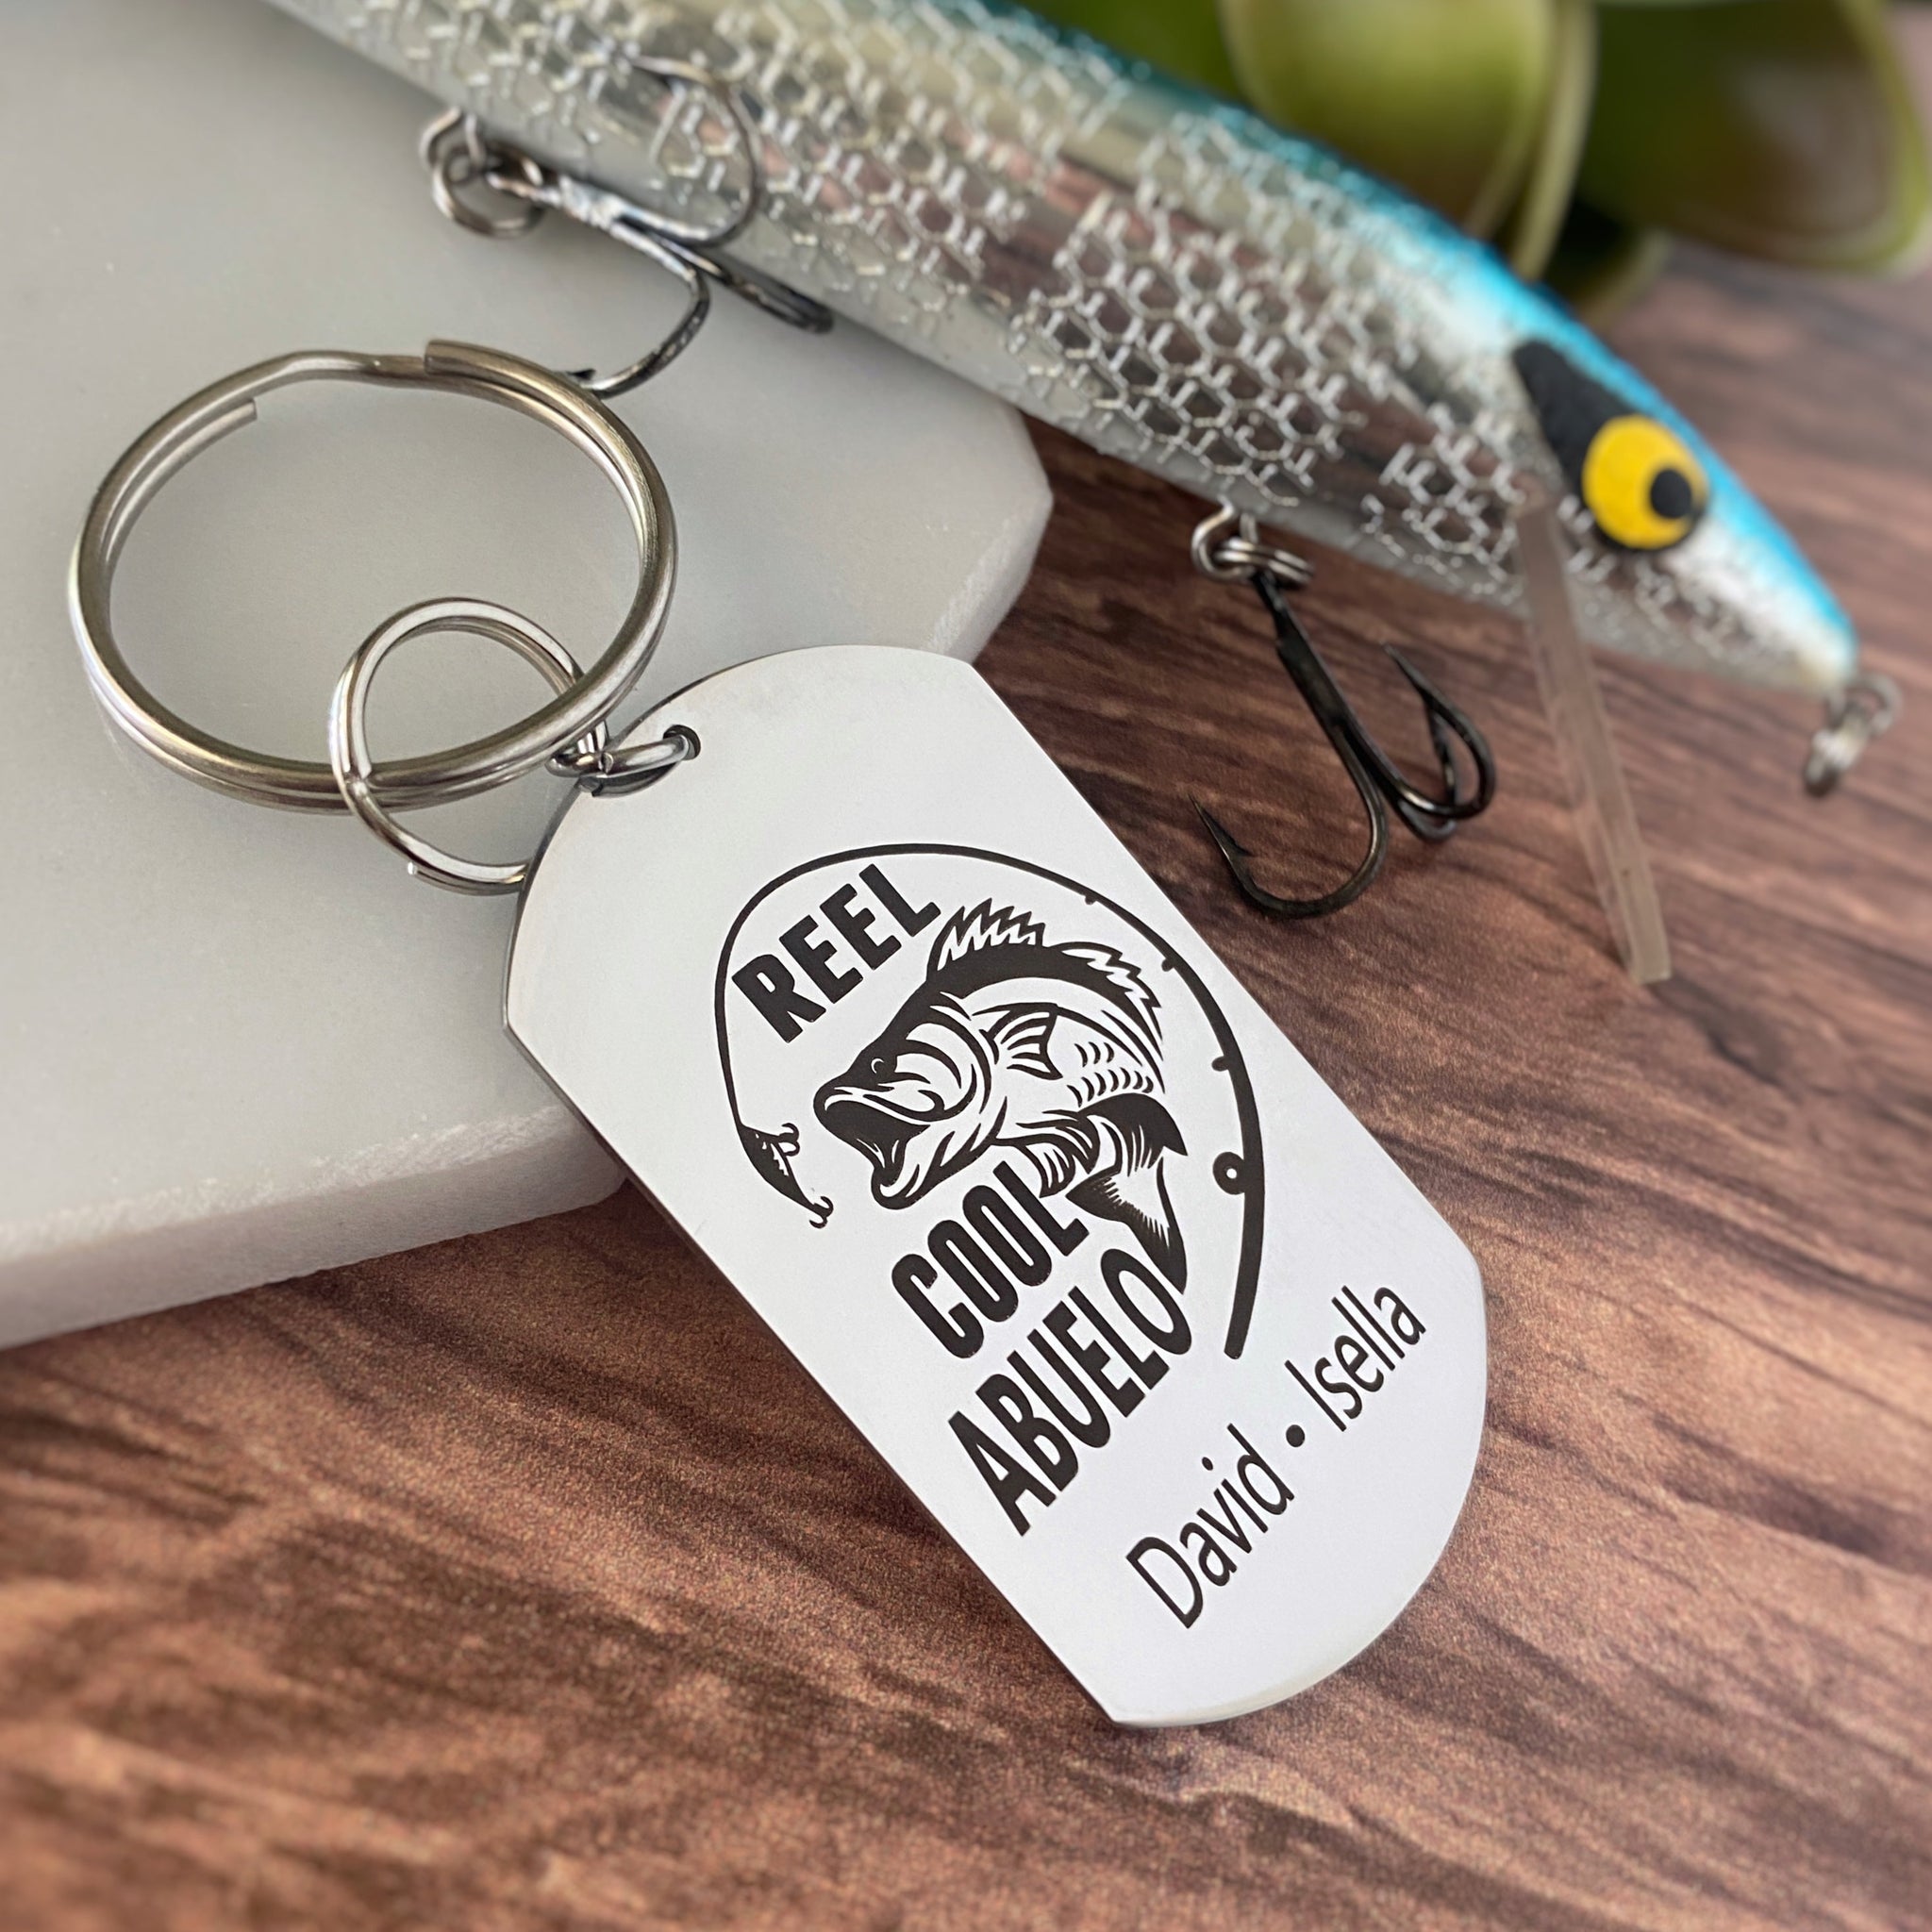 Stamps of Love Hook Line & Sinker - Fishing Lure Keychain